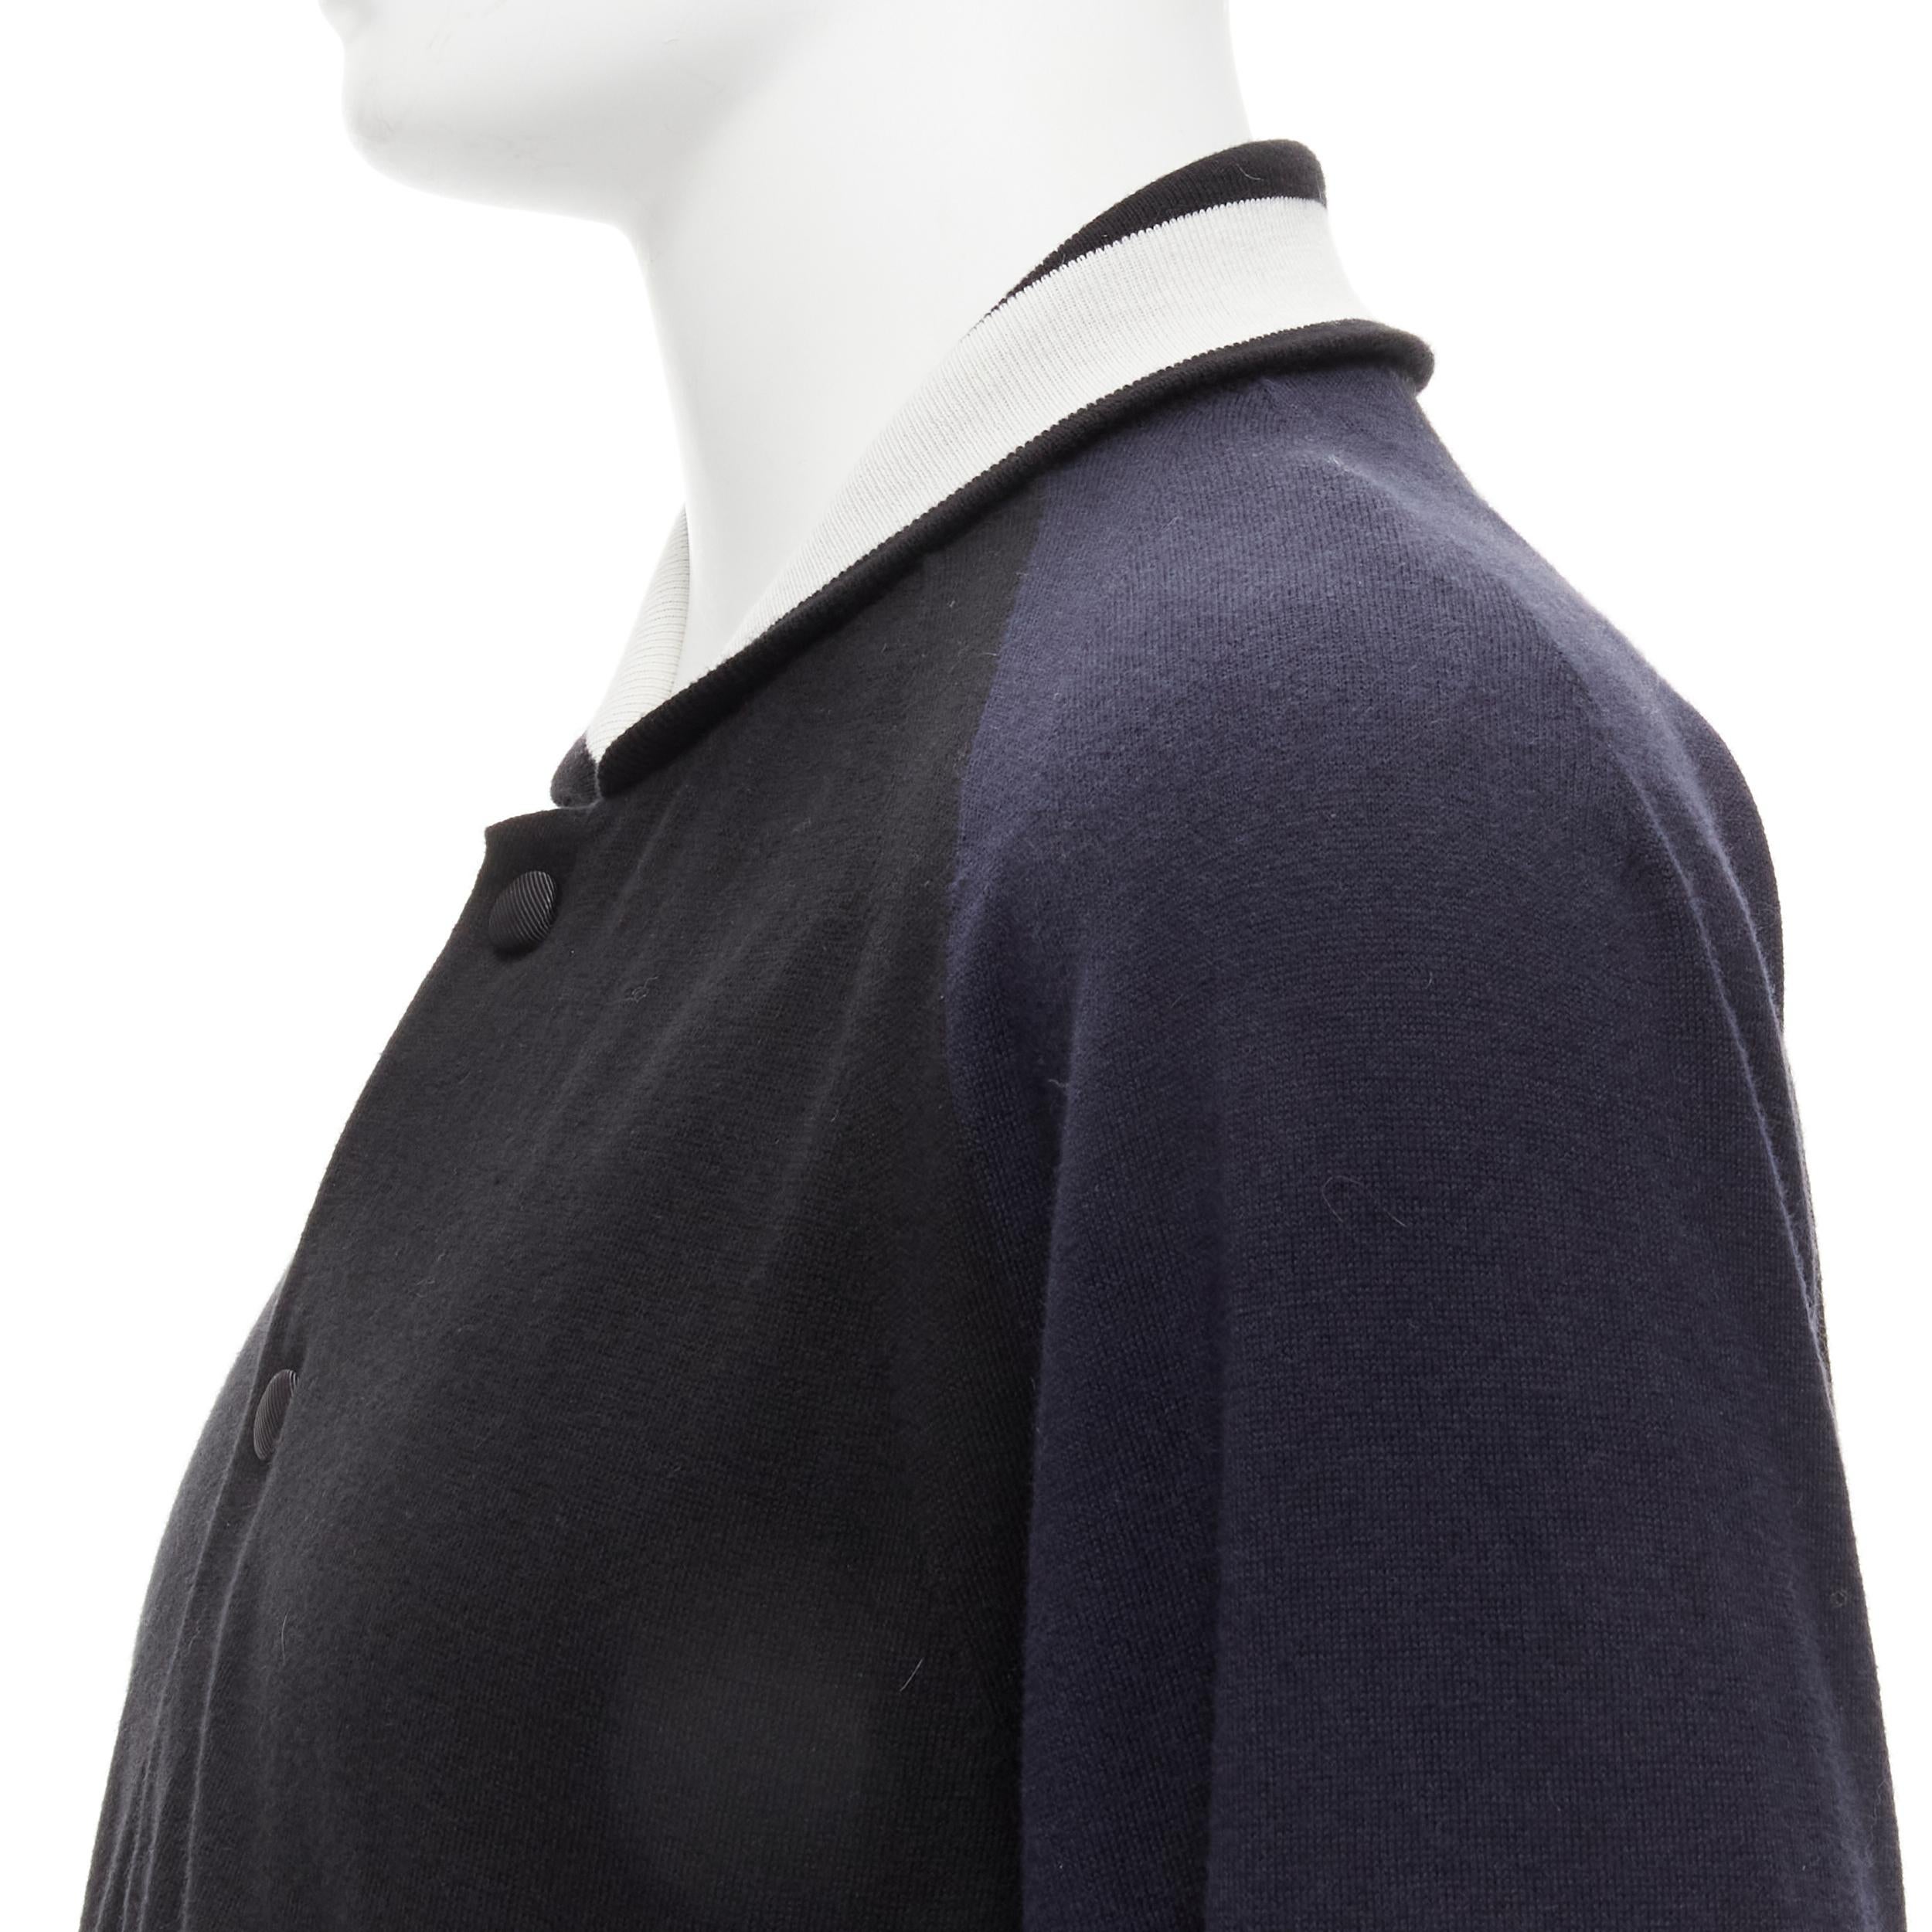 SACAI navy black cotton cashmere blend white raglan bomber JP2 M
Reference: YNWG/A00100
Brand: Sacai
Designer: Chitose Abe
Material: Cotton, Cashmere
Color: Navy, Black
Pattern: Solid
Closure: Snap Buttons
Lining: Fabric
Extra Details: Slit pockets